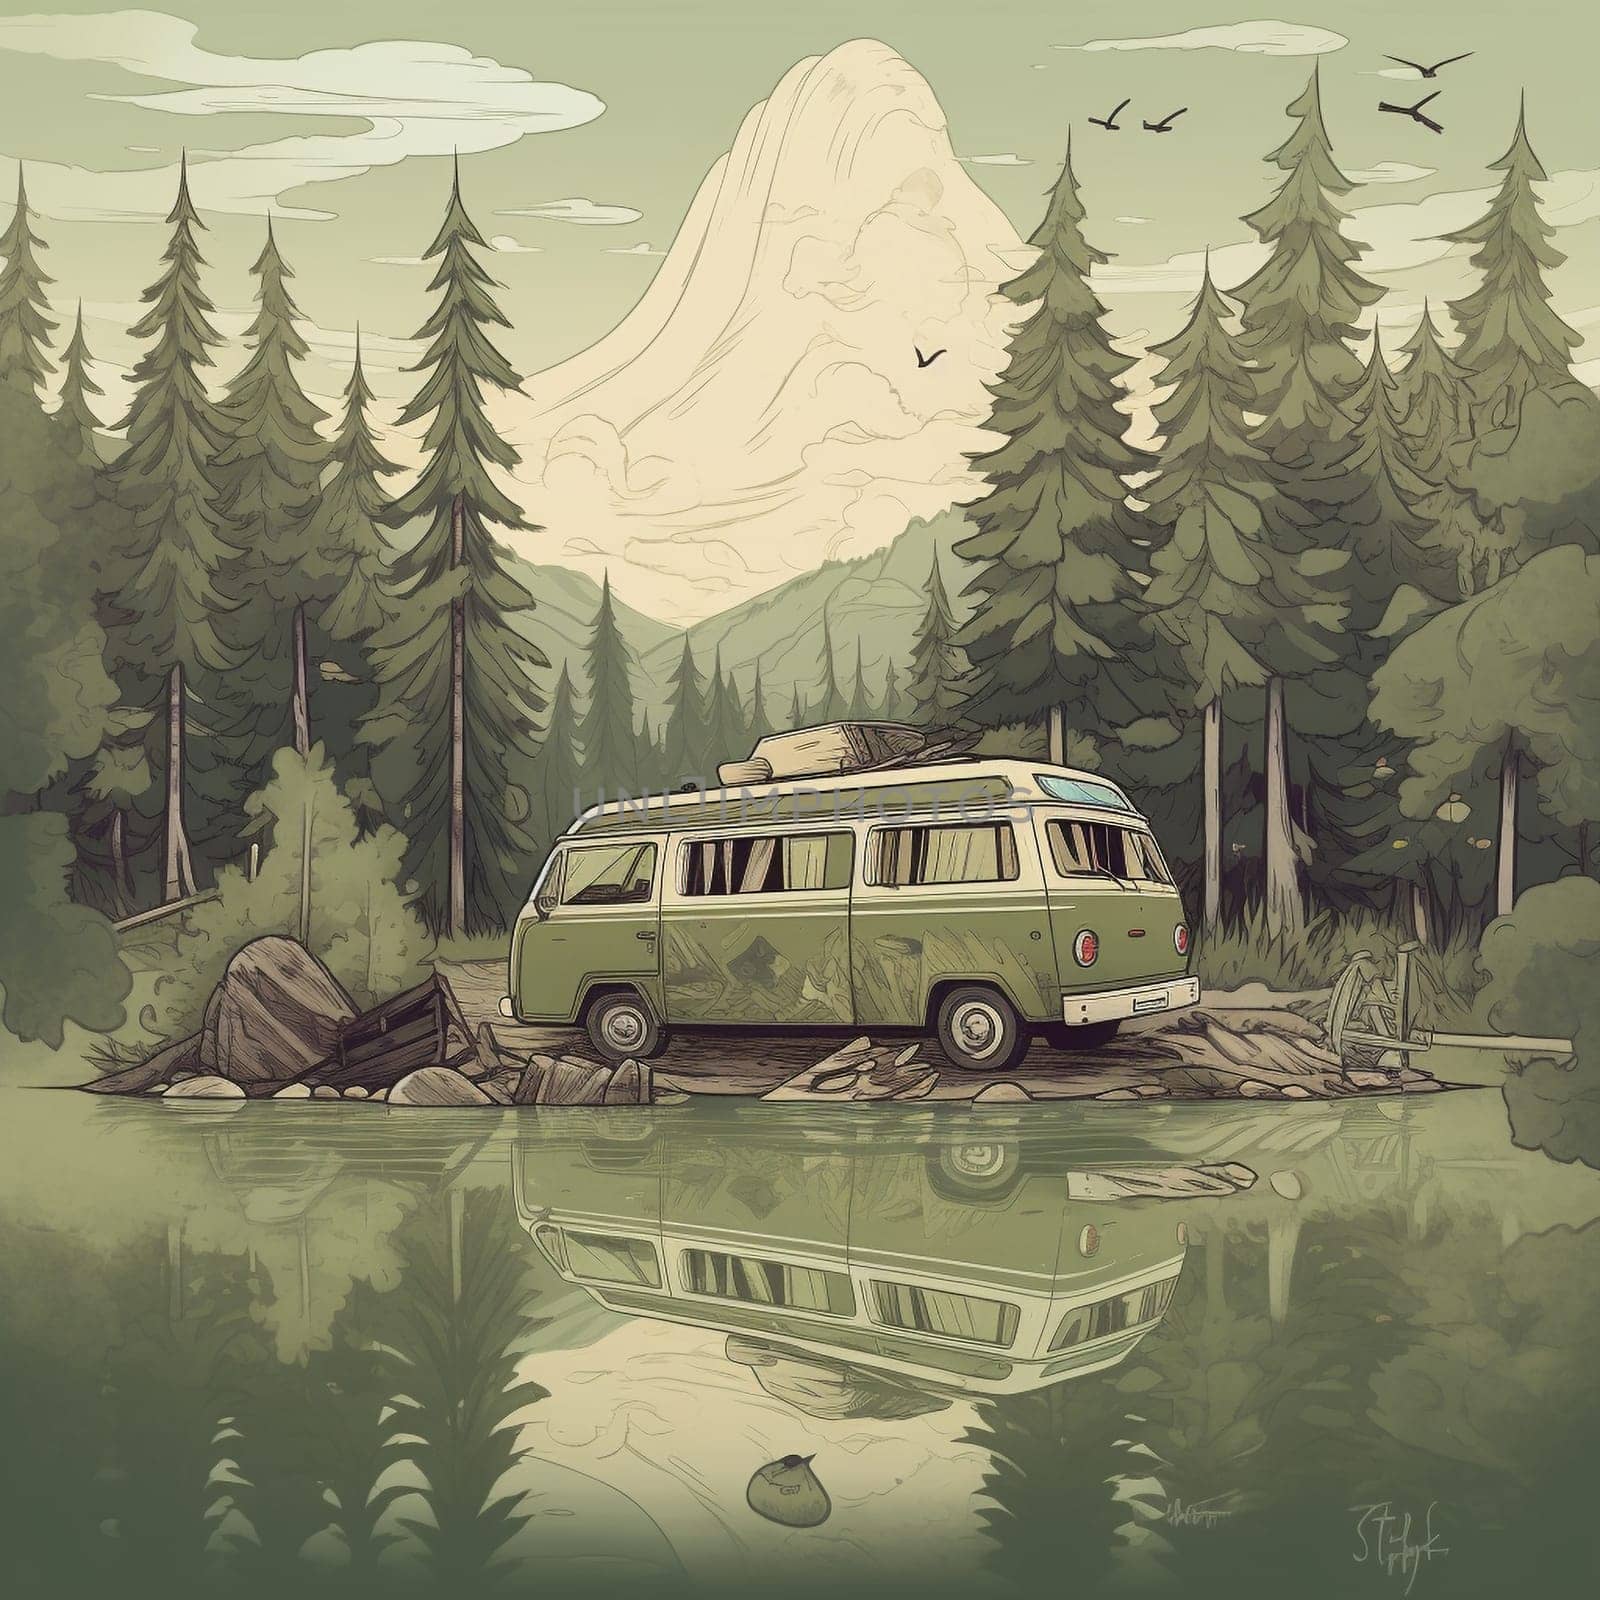 This peaceful image features a camper van parked on the edge of a tranquil forest lake, surrounded by tall trees and a rocky shoreline. The van's exterior is covered in a woodland camo pattern, blending seamlessly into the natural surroundings and providing a sense of harmony and unity with nature. On the shore of the lake, a small fishing boat is visible, suggesting a relaxing day spent fishing and enjoying the serenity of the water. The natural beauty of the area is on full display, with the lush trees and tranquil lake creating a soothing and calming atmosphere.